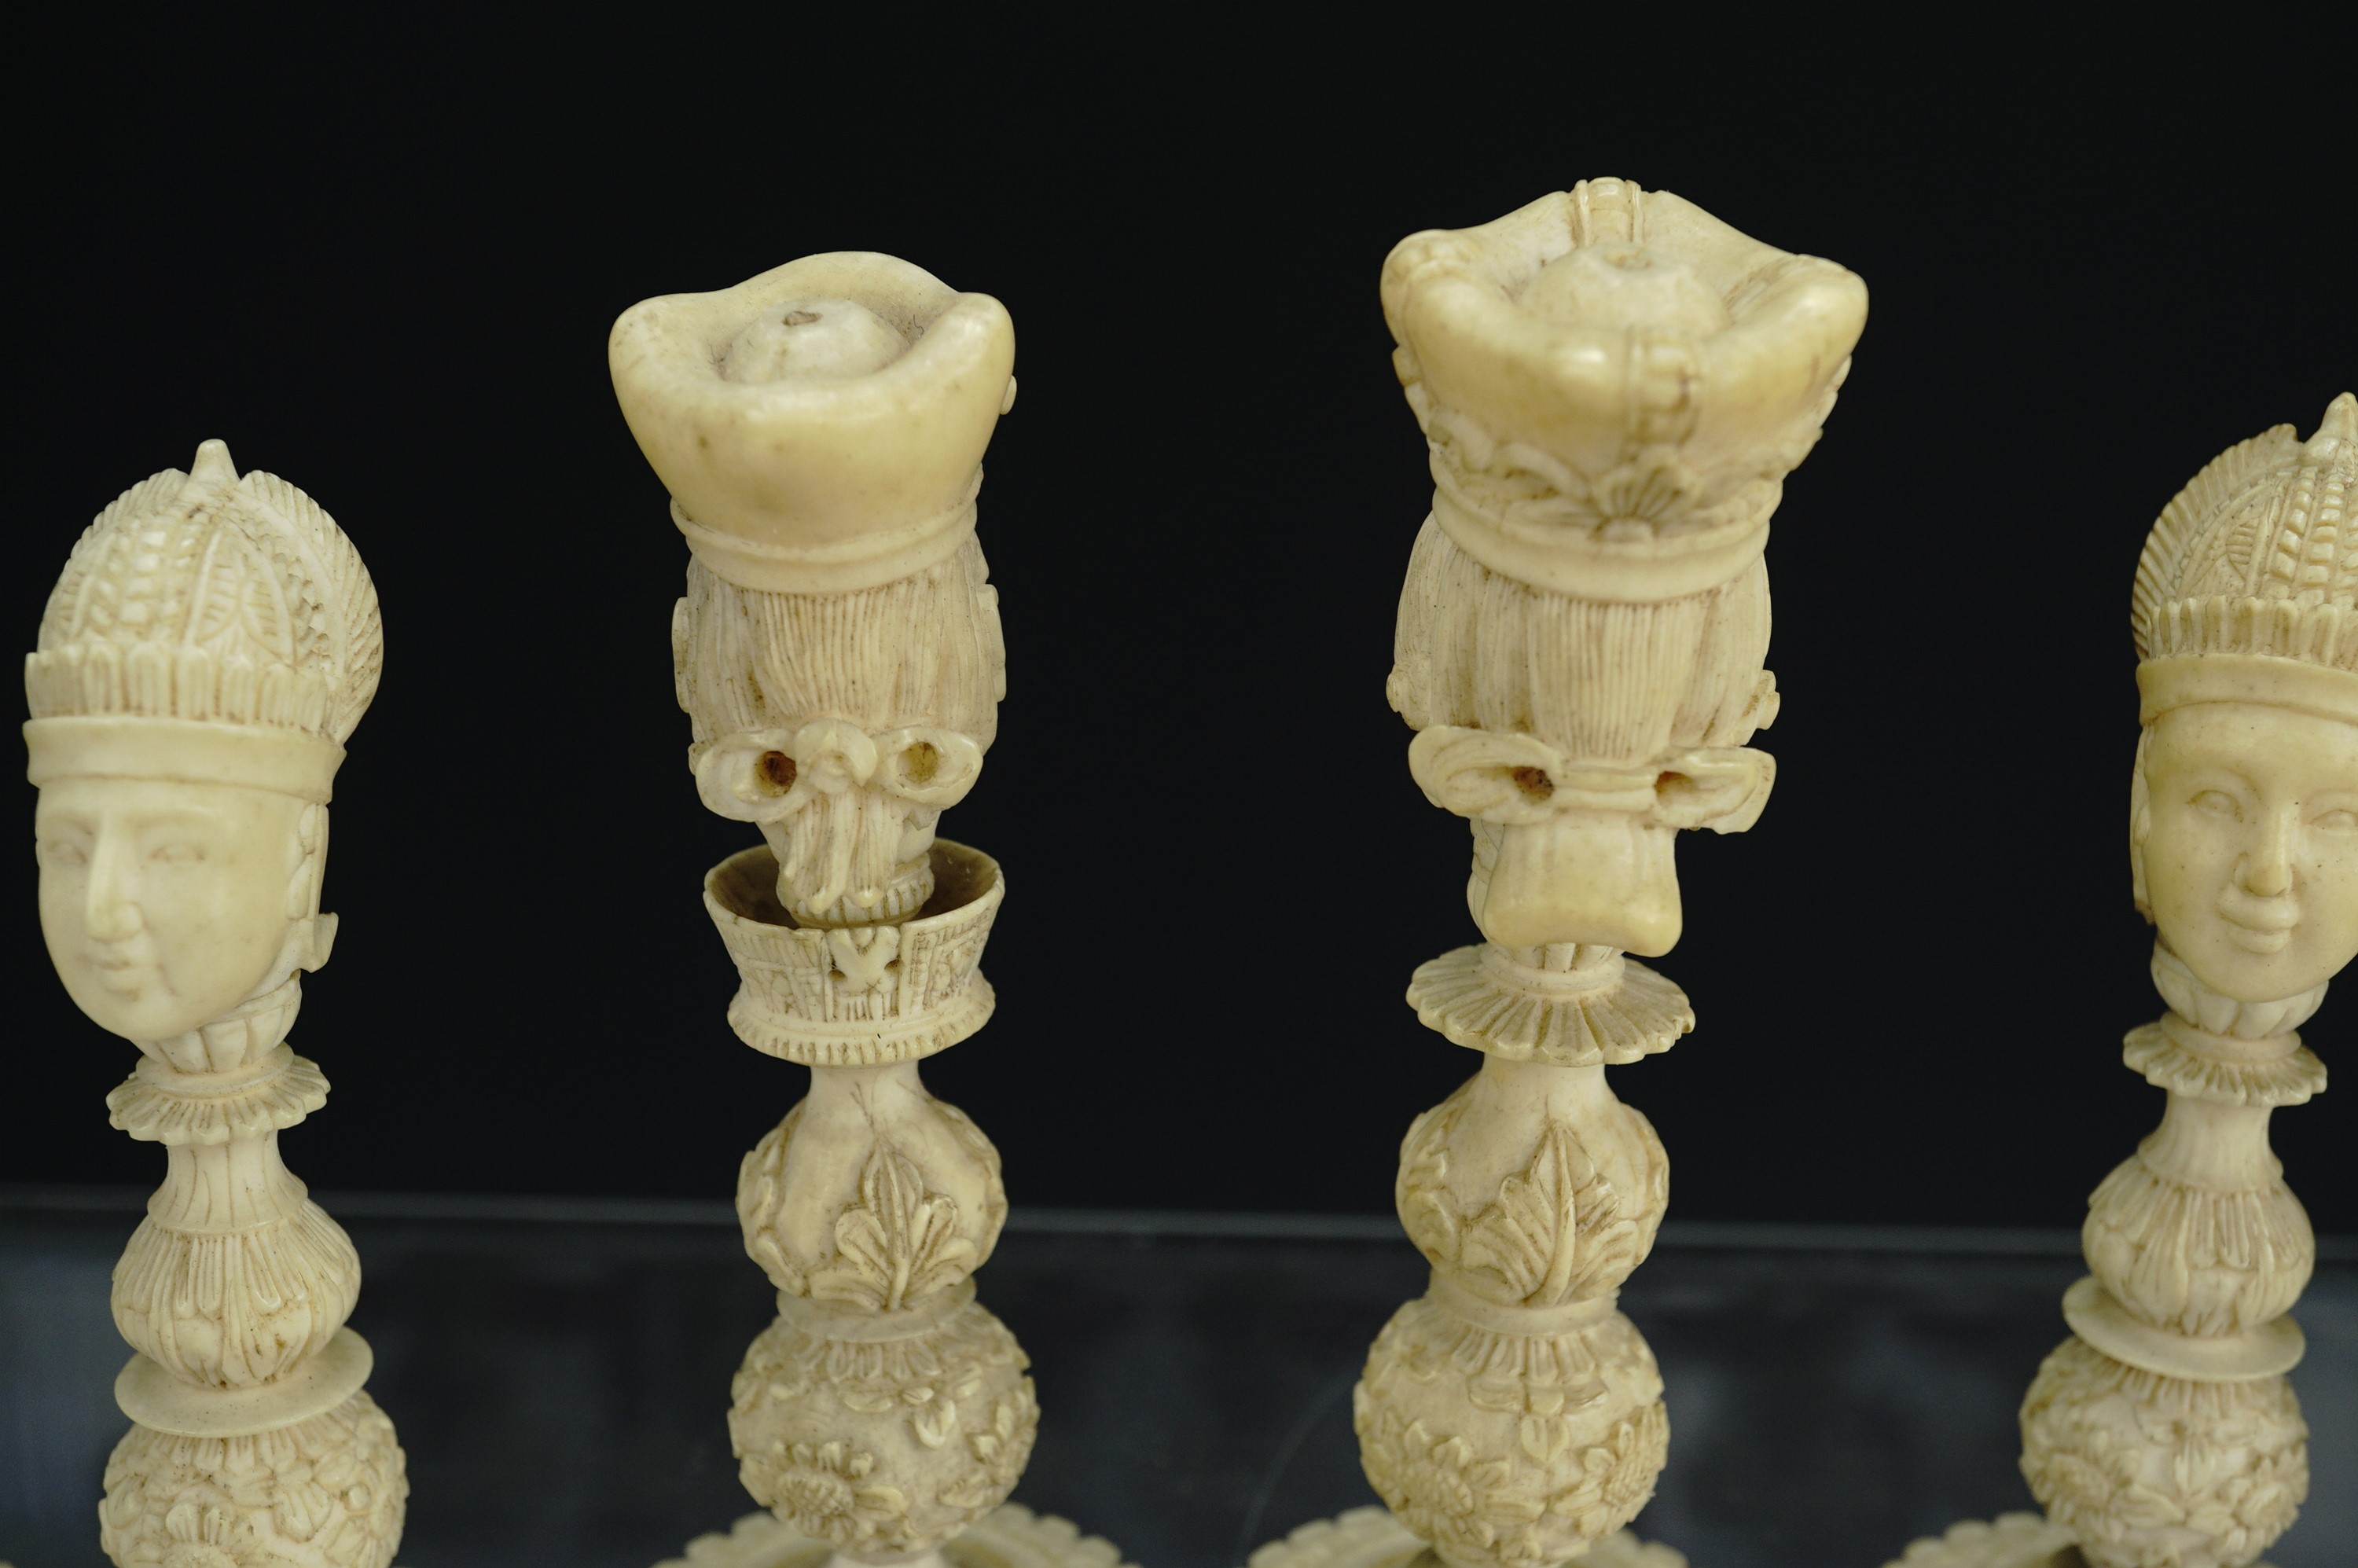 A late 18th / early 19th Century Chinese / Canton export ivory chess set, likely Macau, Kings - Image 6 of 7